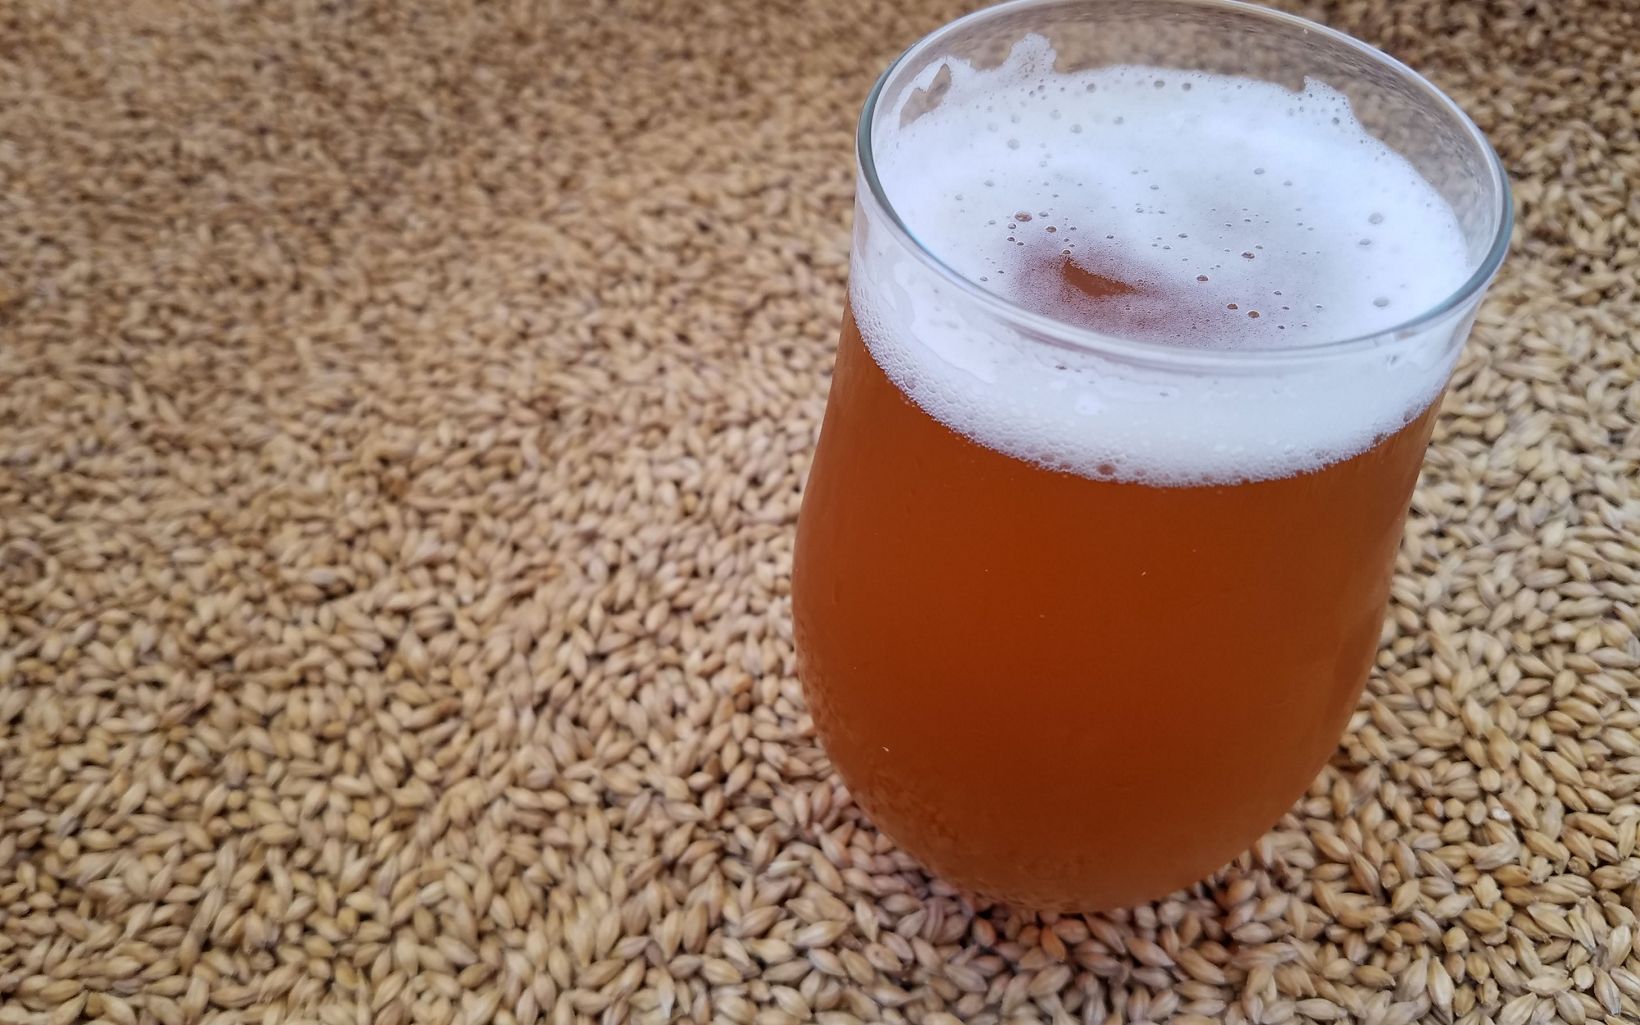 
                
                  Craft Brew Barley malted at Sinagua Malt yields high-quality beer. Local brewpubs in Arizona are using the sustainable ingredient to help reduce water demands on the Verde River.
                  © Chris Chappell/TNC
                
              